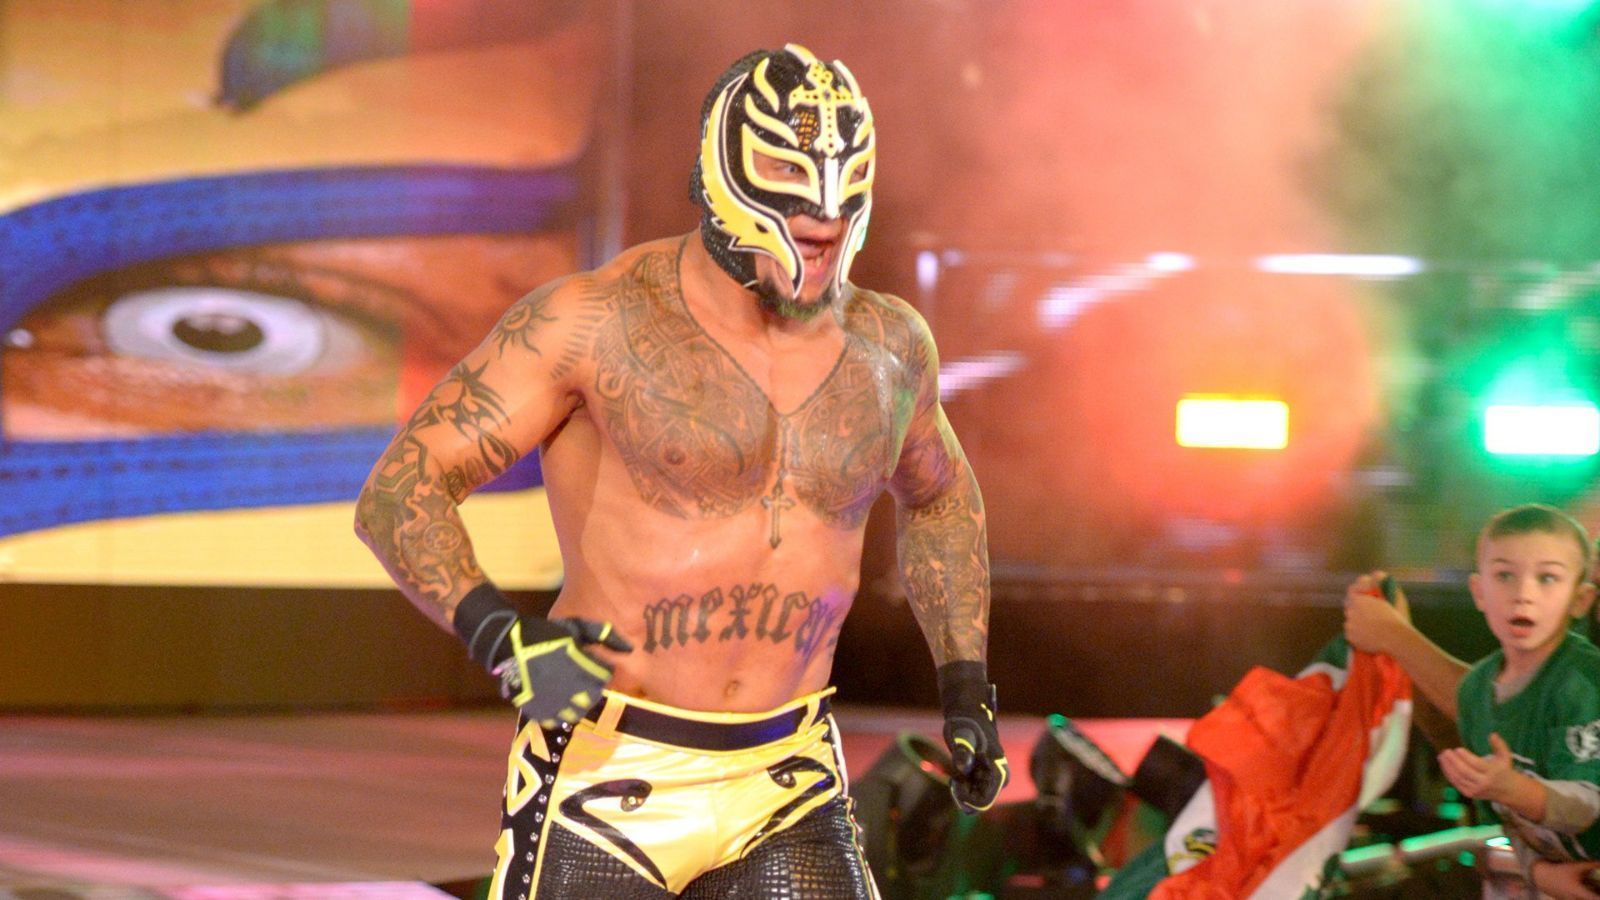 Rey Mysterio is the Master of the 619.